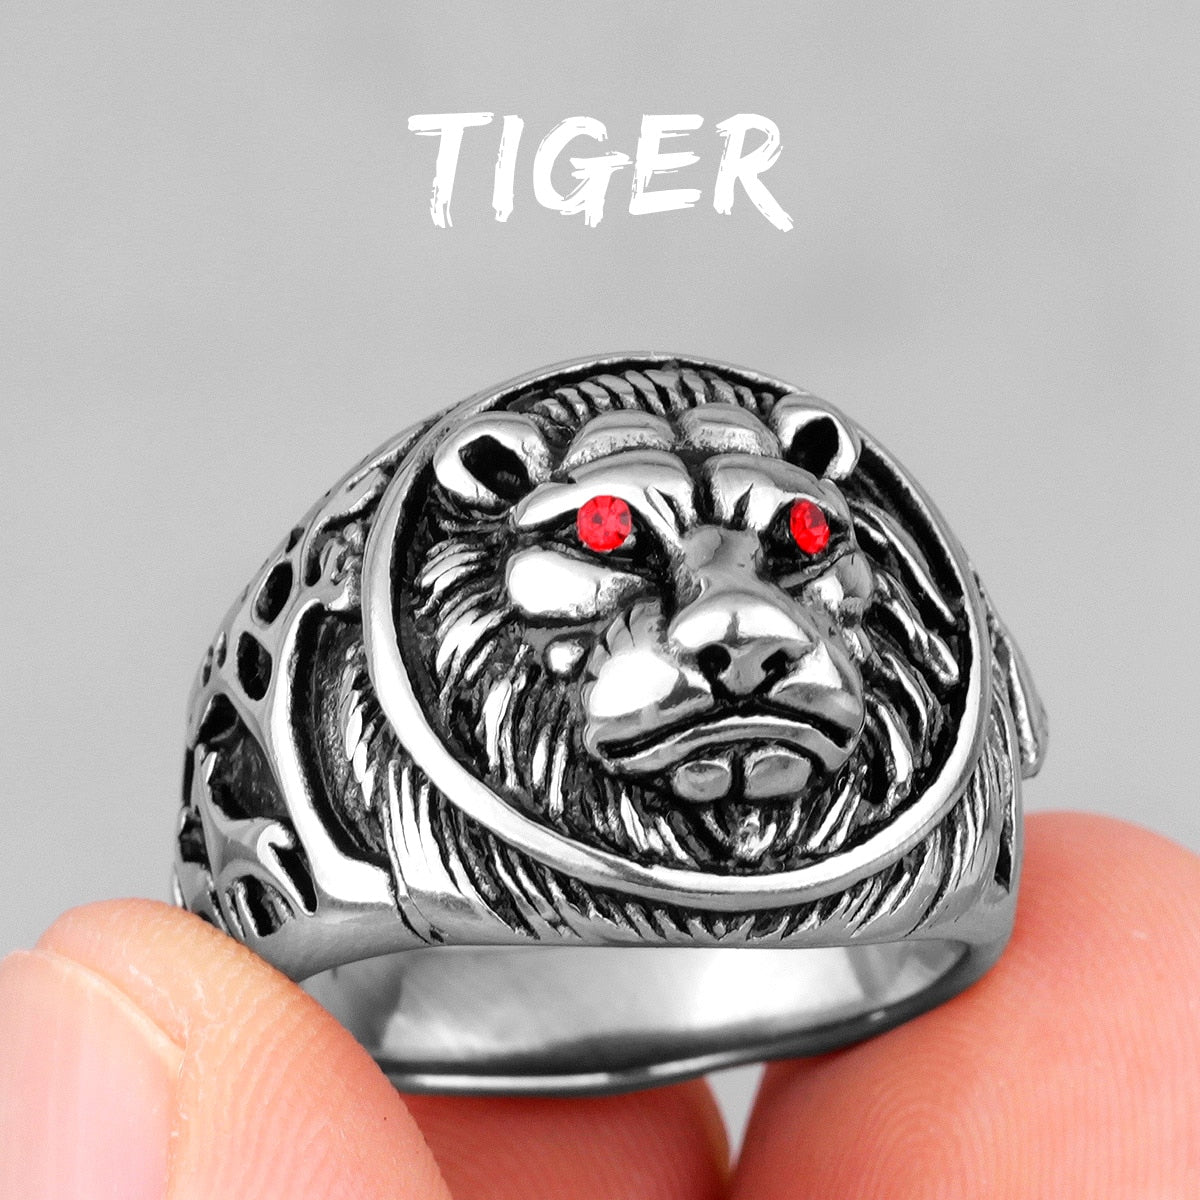 Black Tiger Animal Stainless Steel Mens Rings Punk HipHop Rap Unique For Male Boyfriend Biker Jewelry Creativity Gift R591-Silver